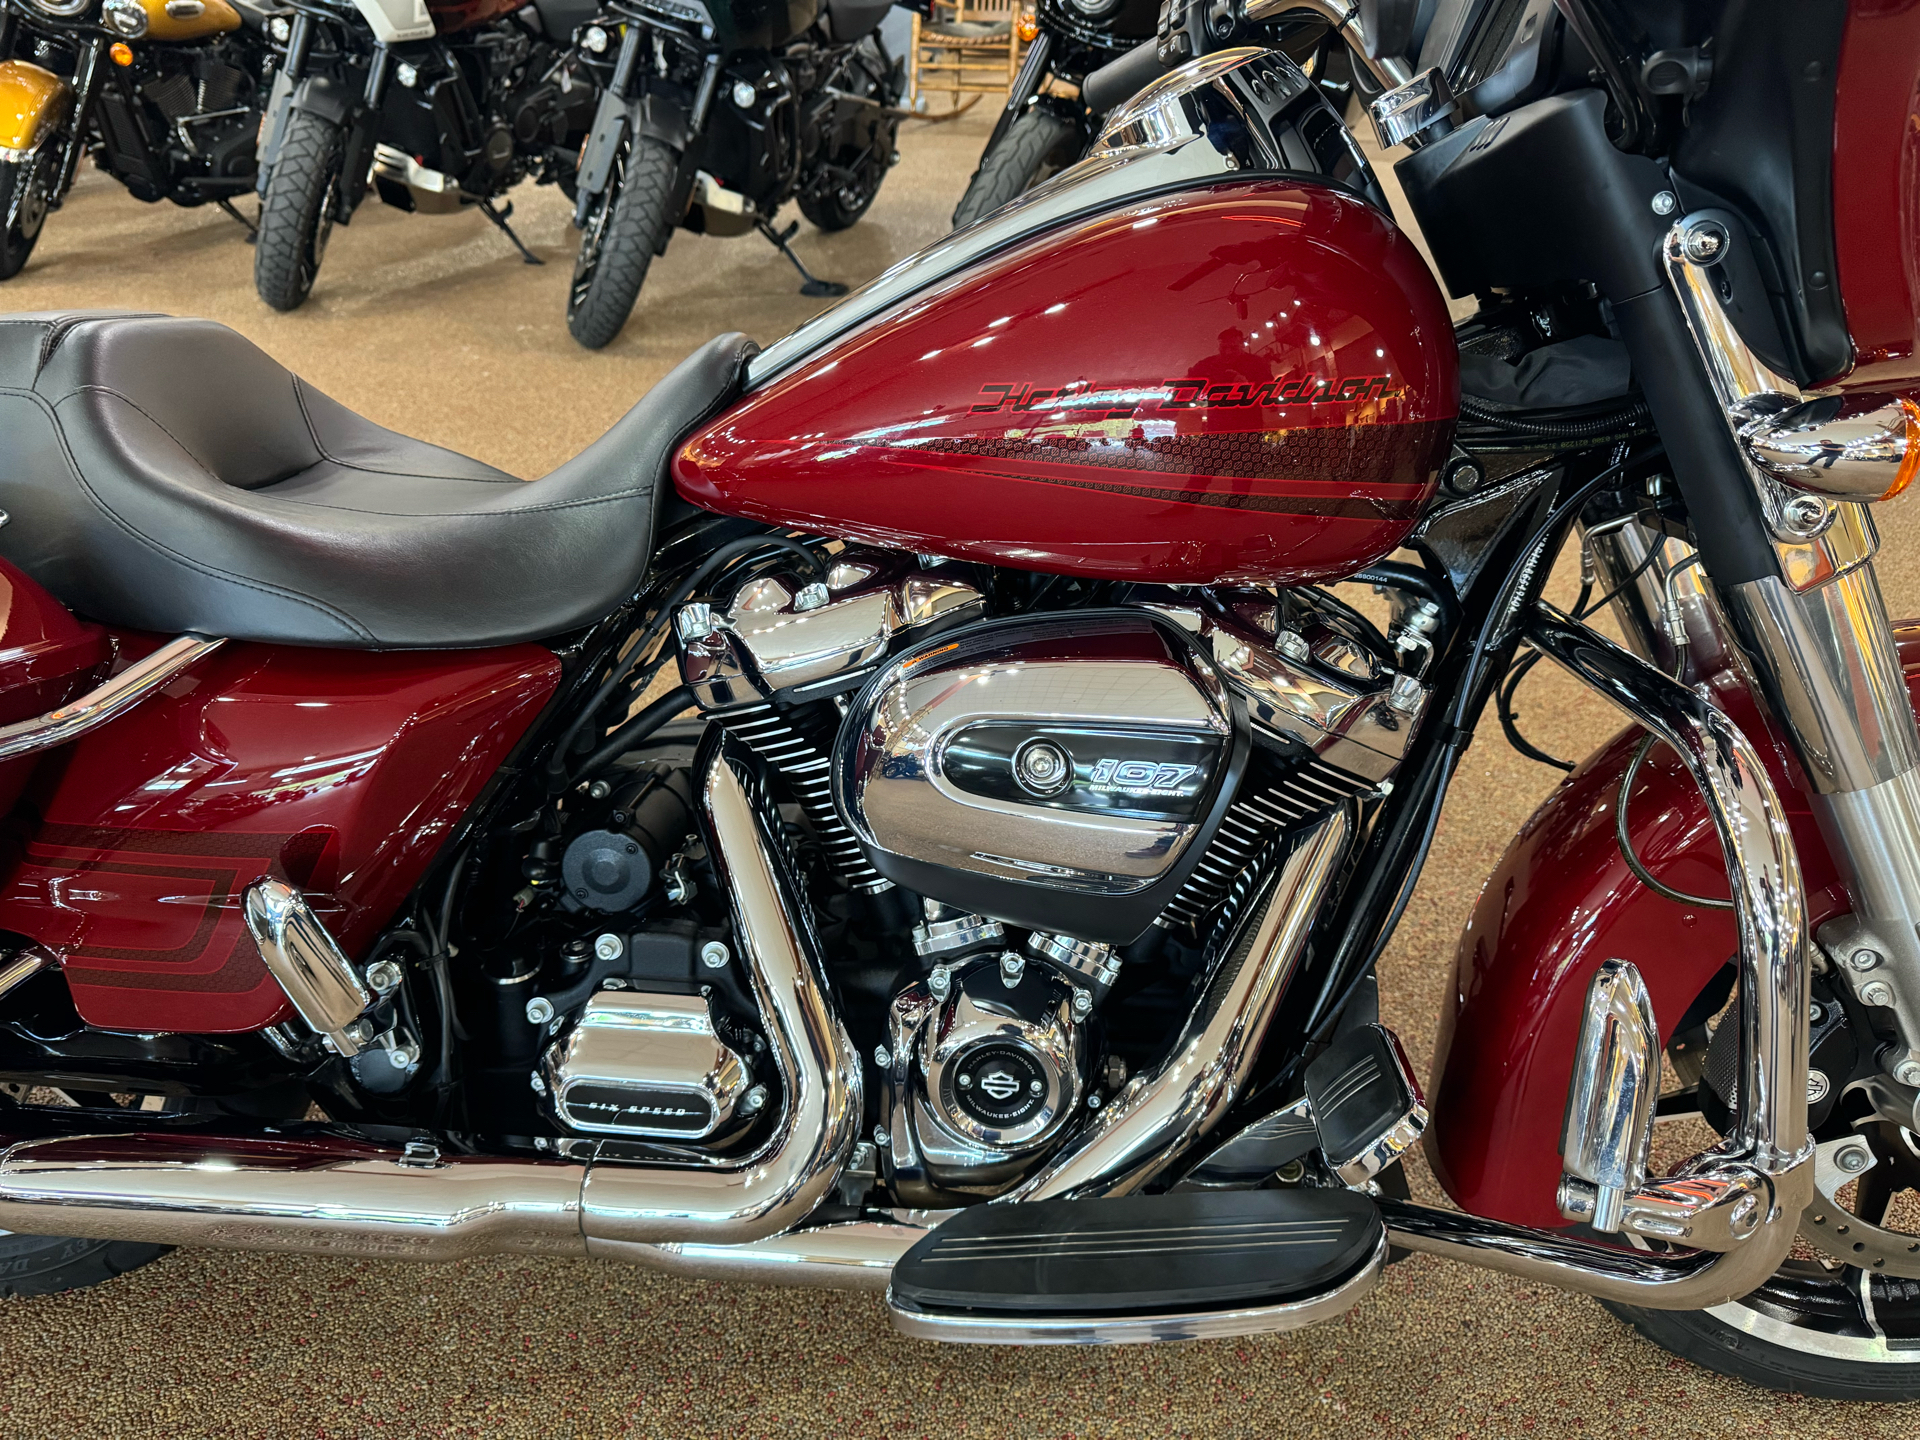 2020 Harley-Davidson Street Glide® in Knoxville, Tennessee - Photo 6